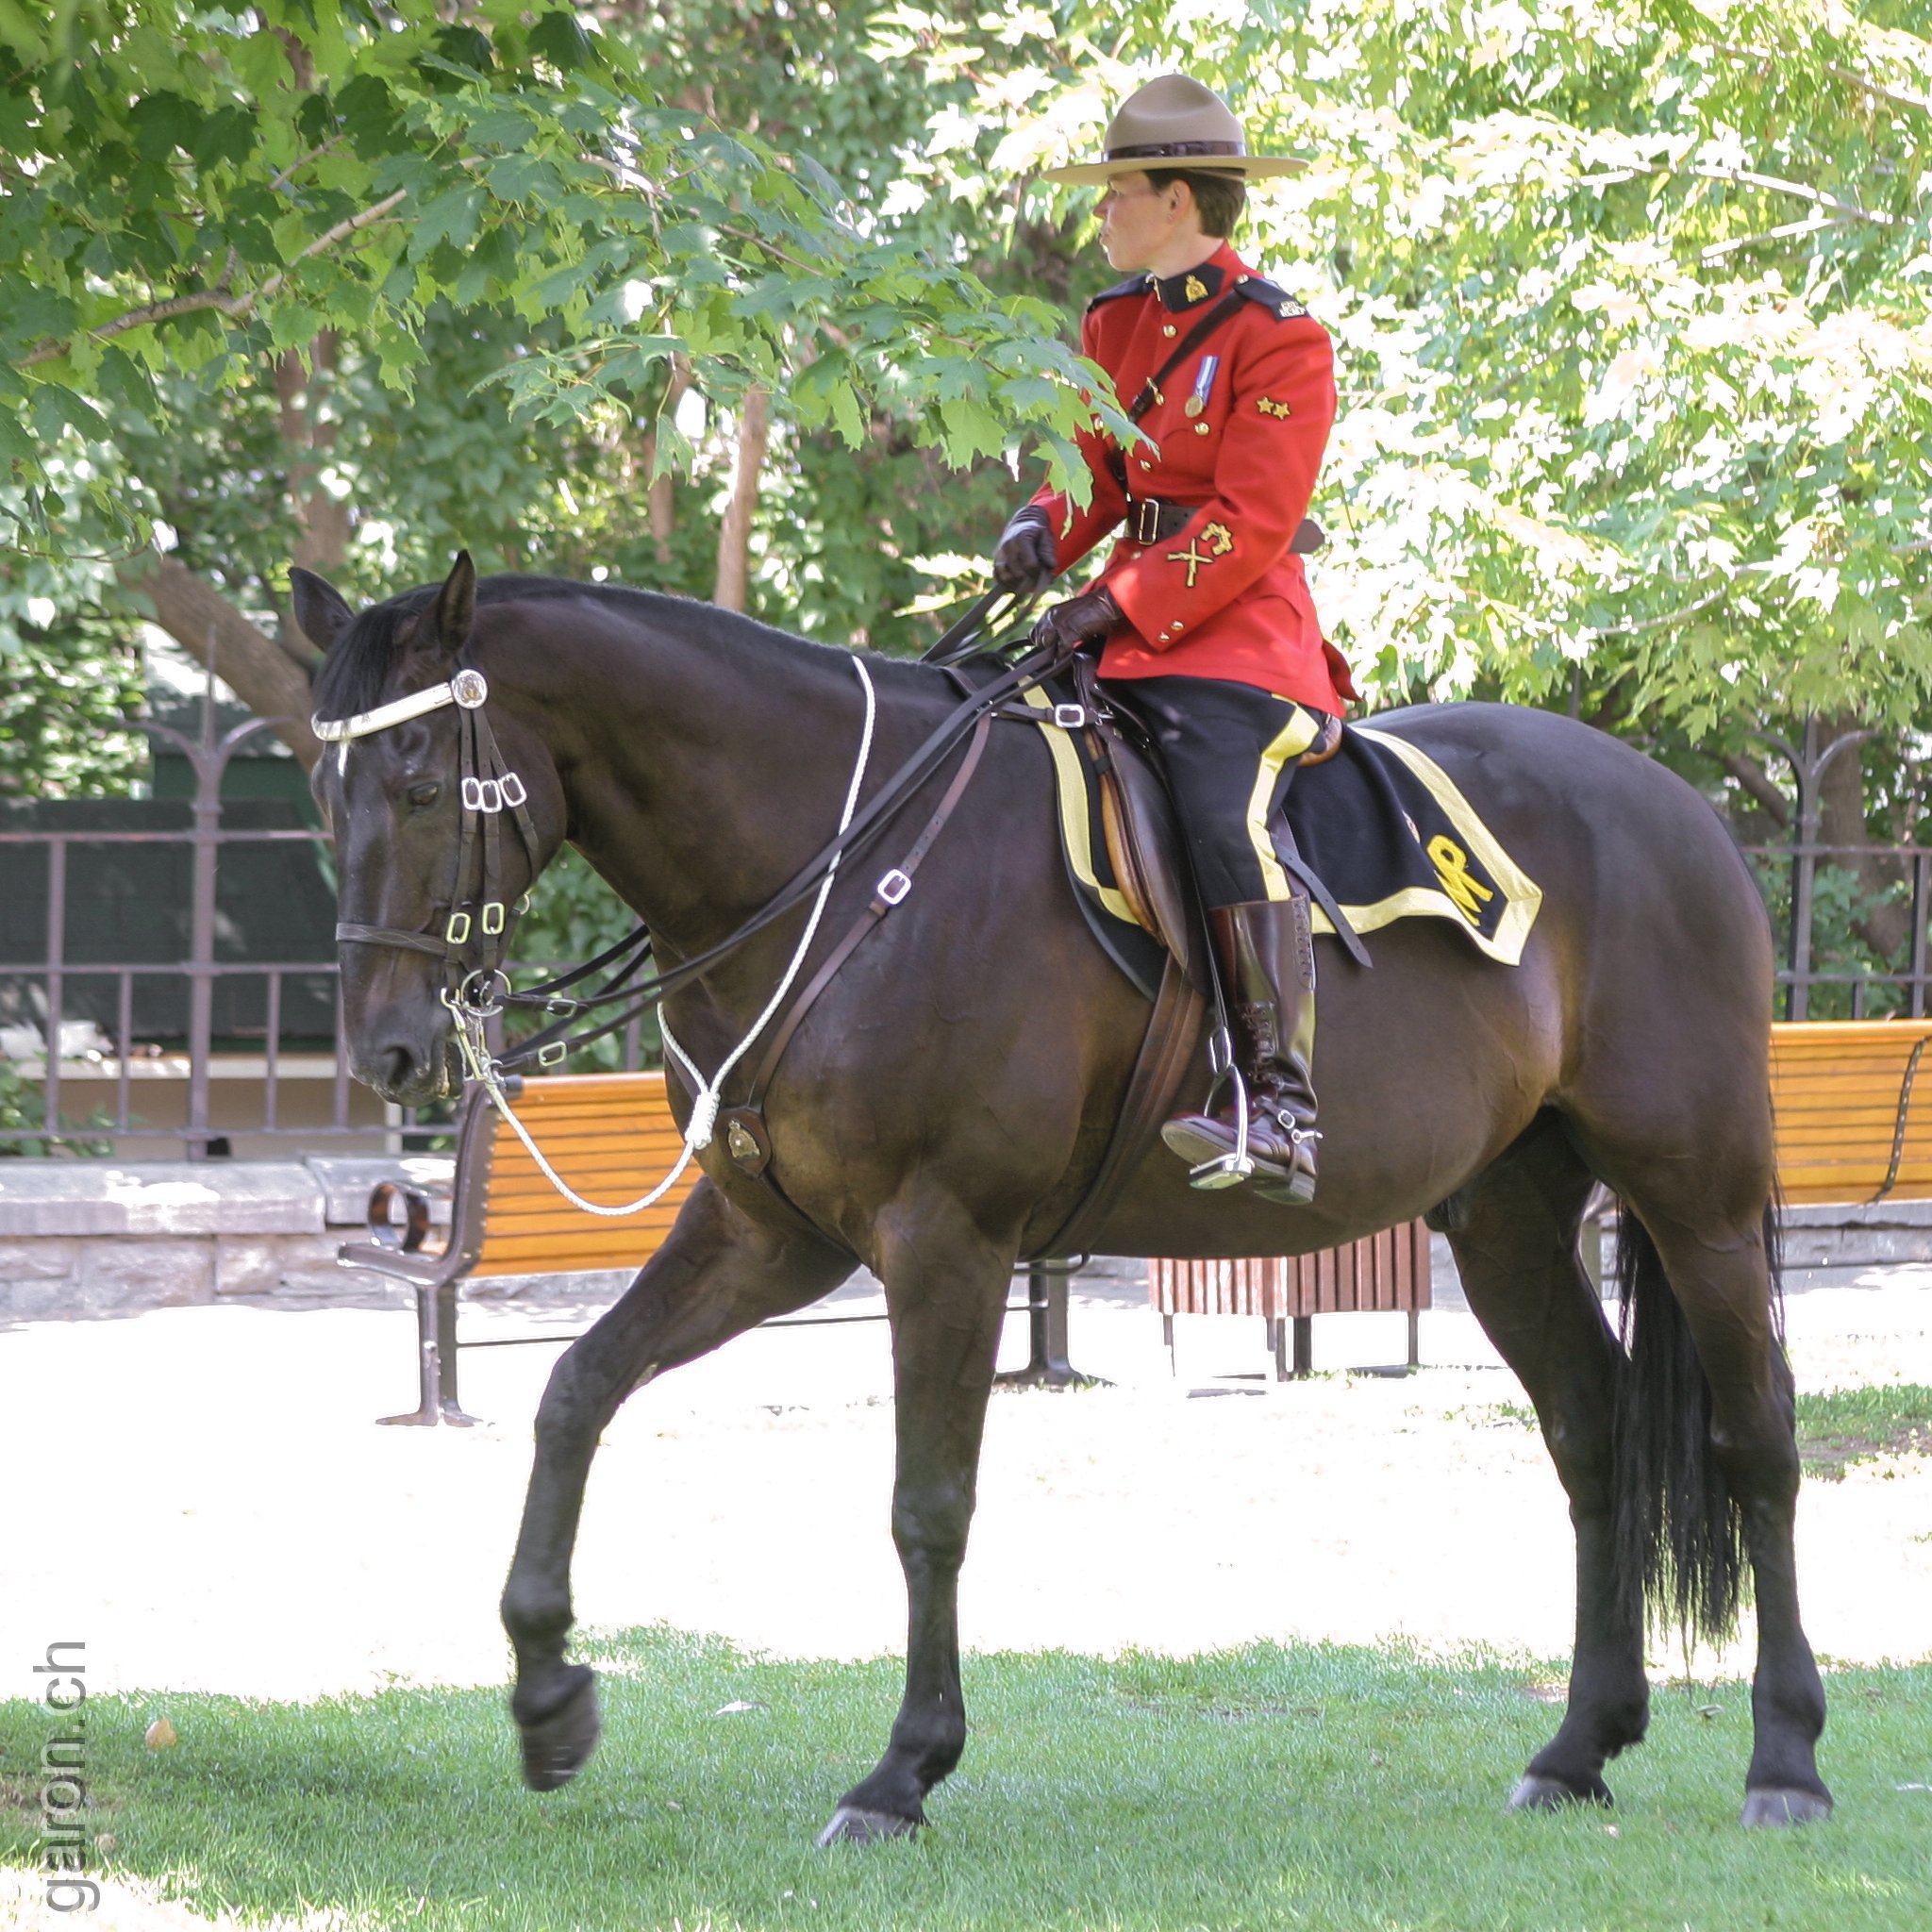 Ottawa, patrol around the canadian parliament RCMP Officer with horse